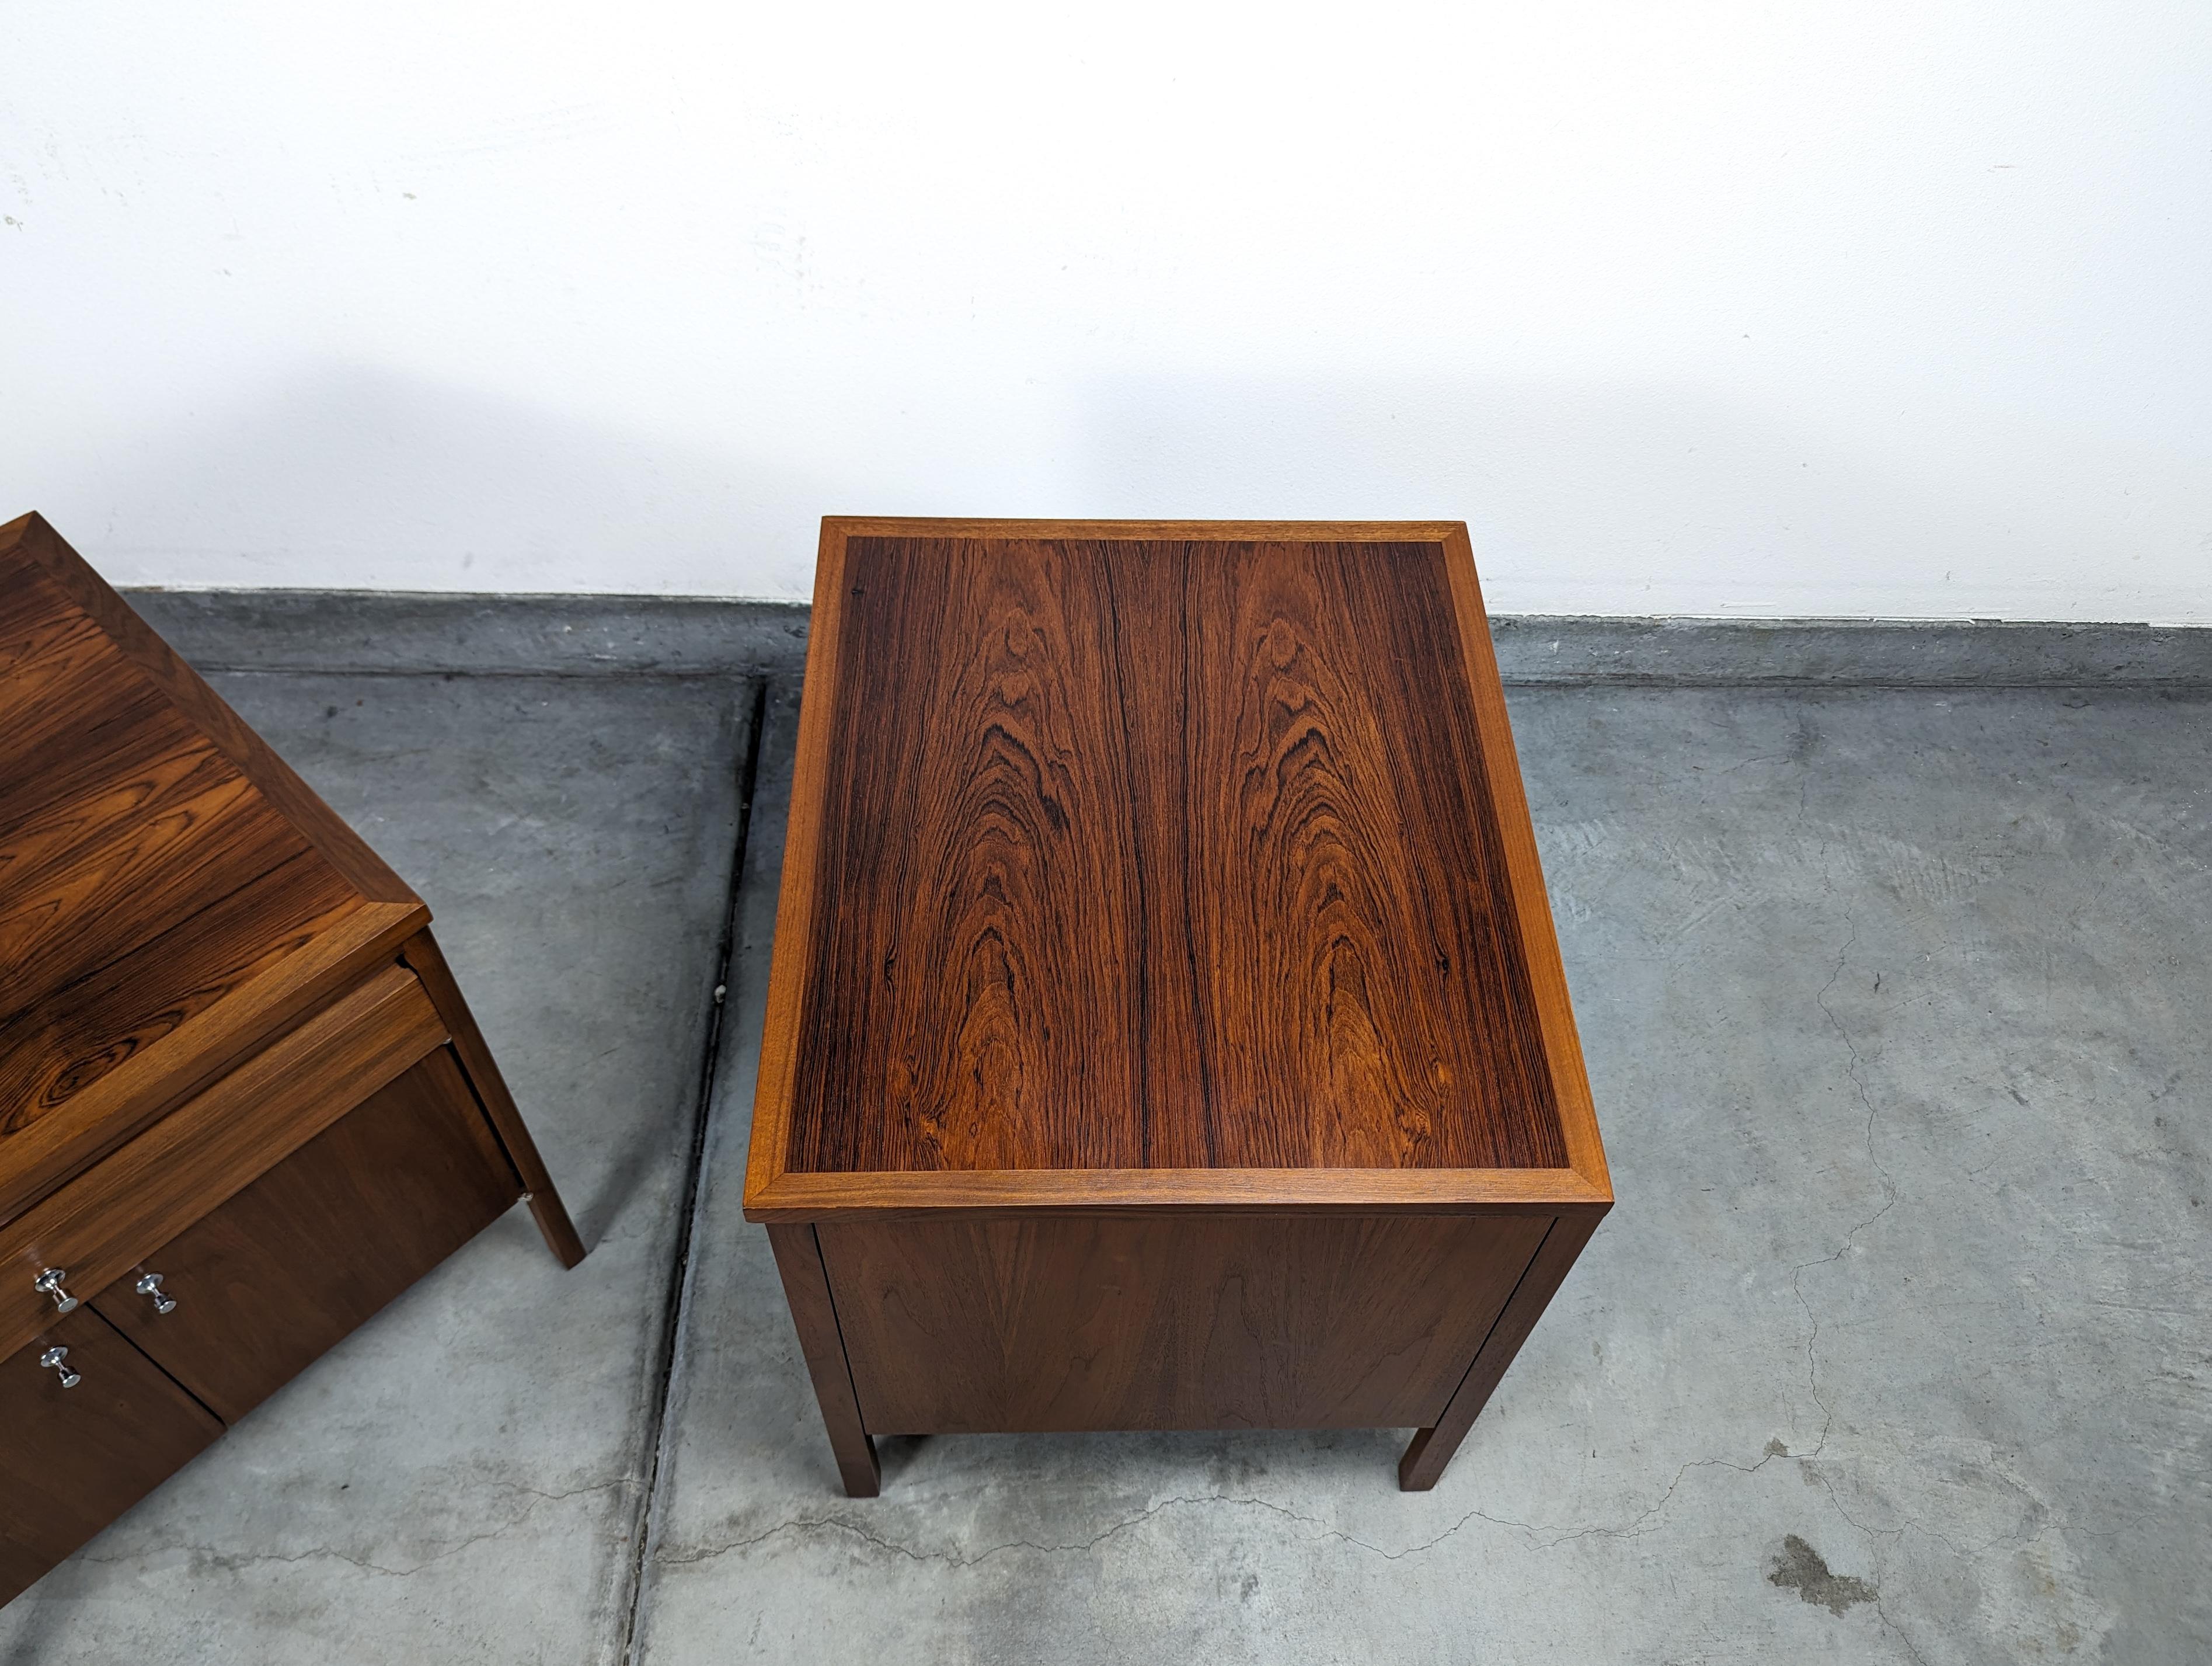 Pair of Mid Century Modern Delineator Nightstands by Paul McCobb for Lane, c1960 For Sale 5